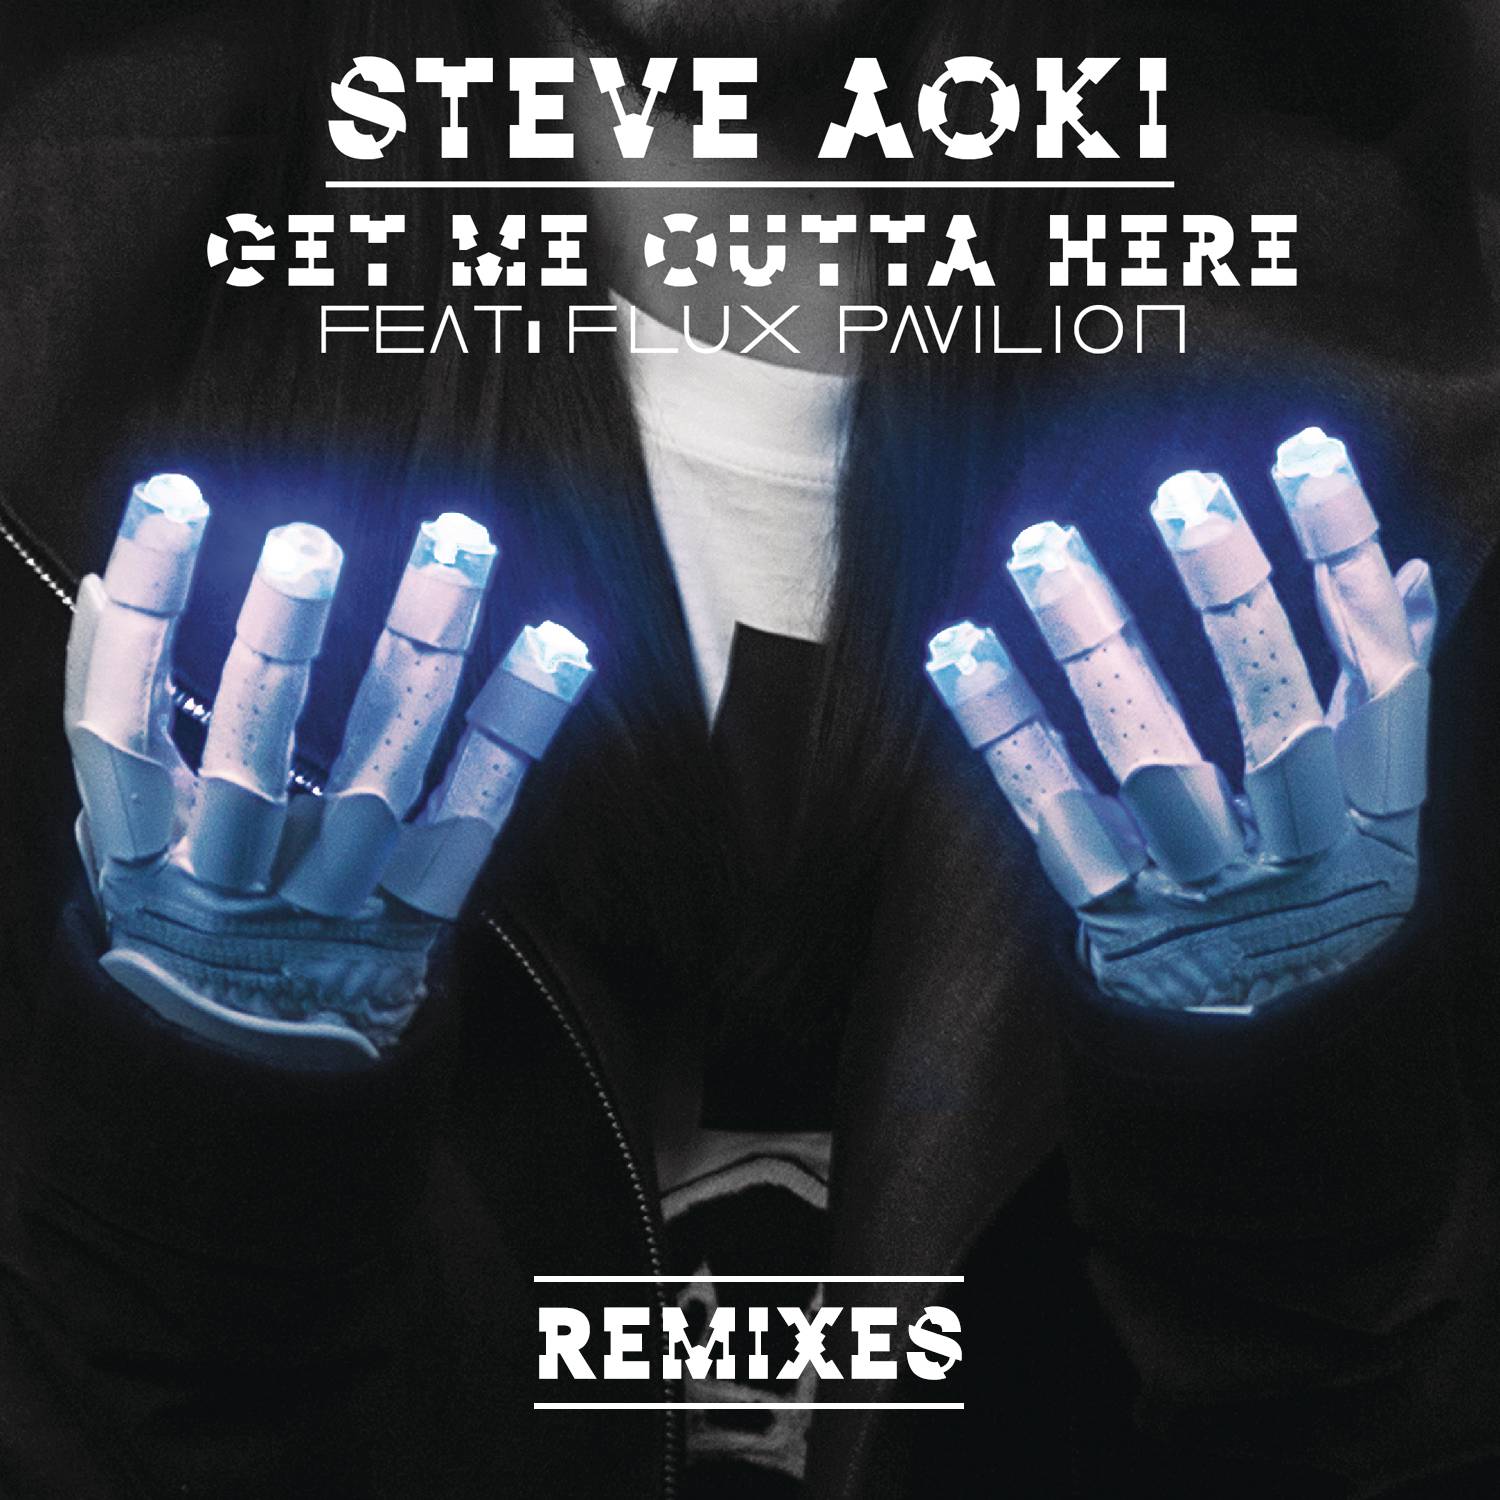 Get Me Outta Here (Remixes)